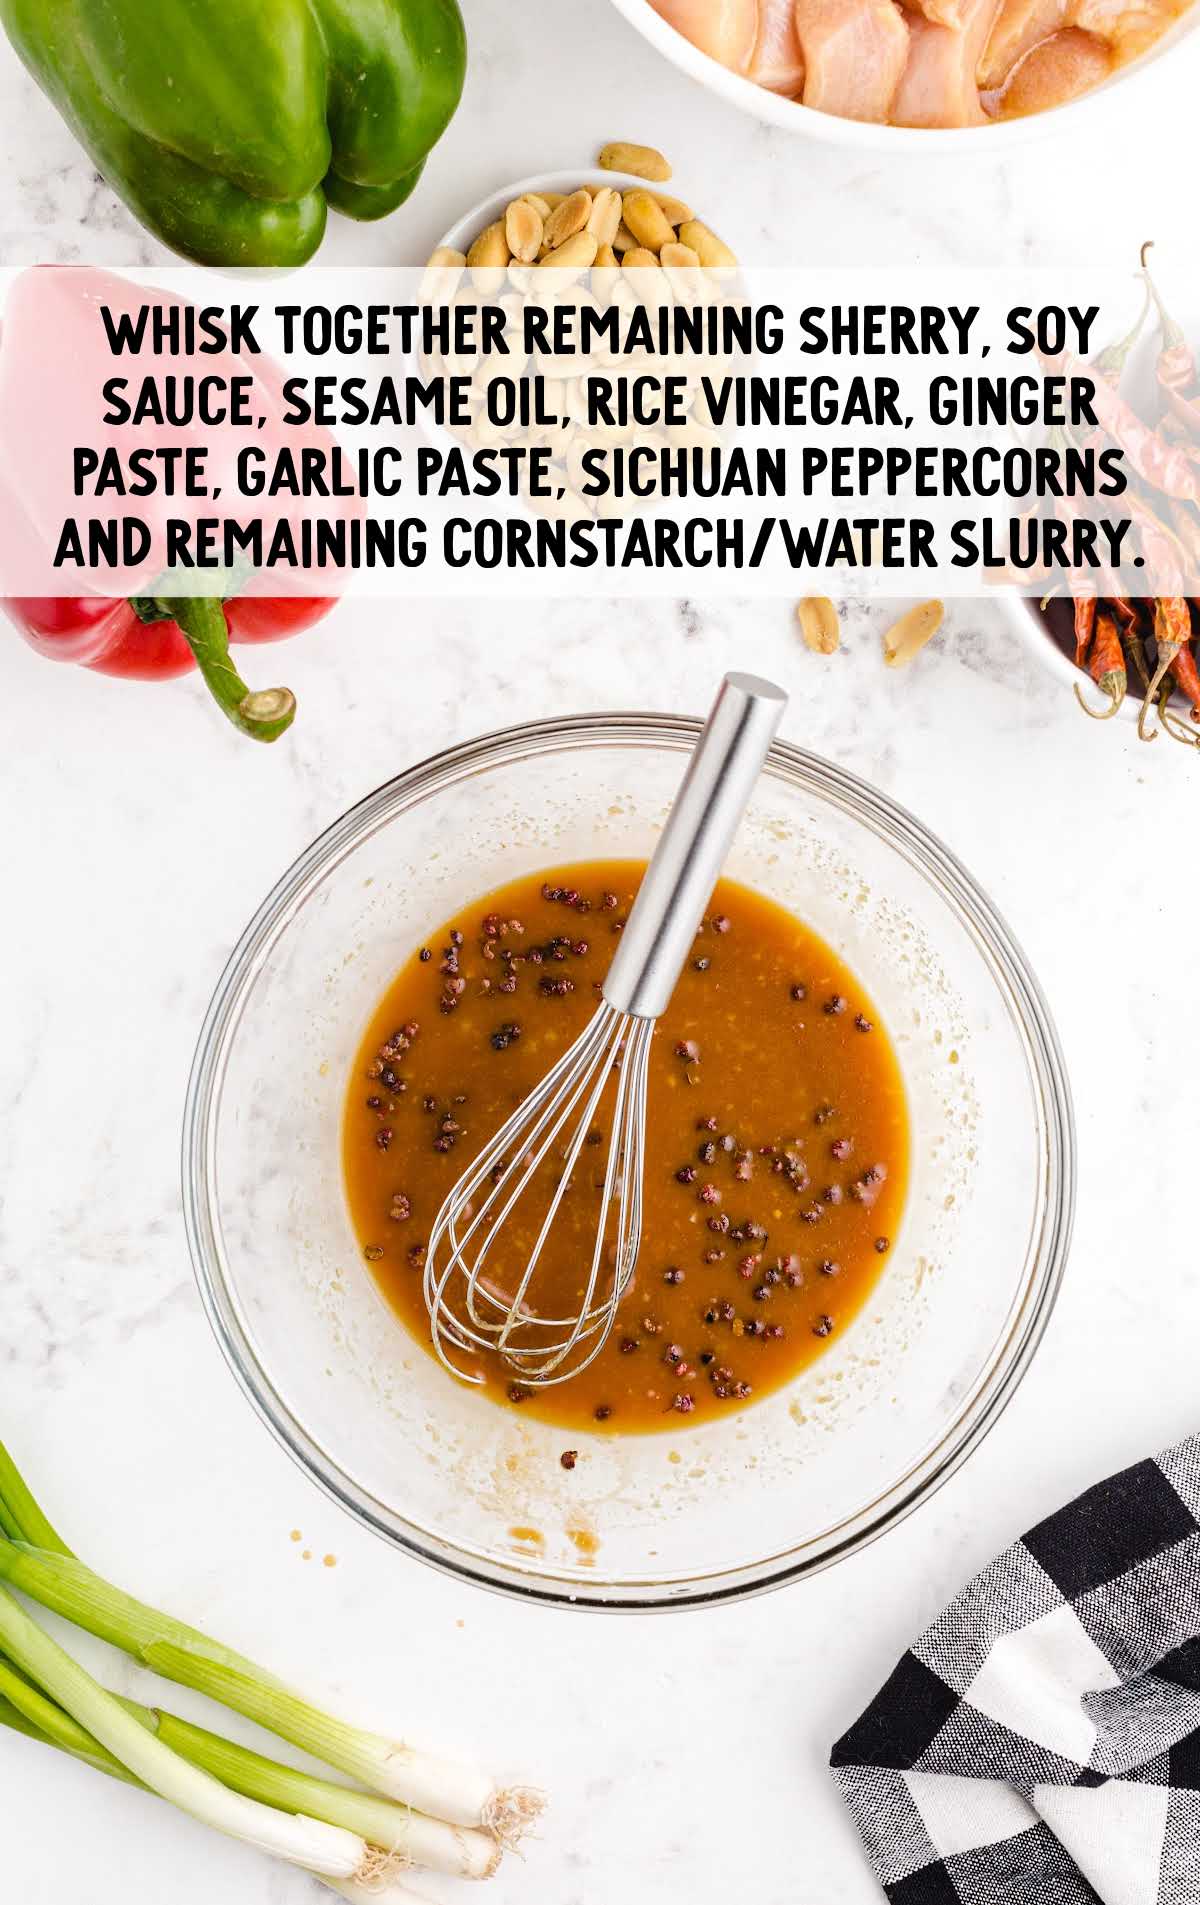 sherry, soy sauce, sesame oil, rice vinegar, ginger paste, garlic paste, sichuan peppercorns and cornstarch/water slurry whisked together in a bowl